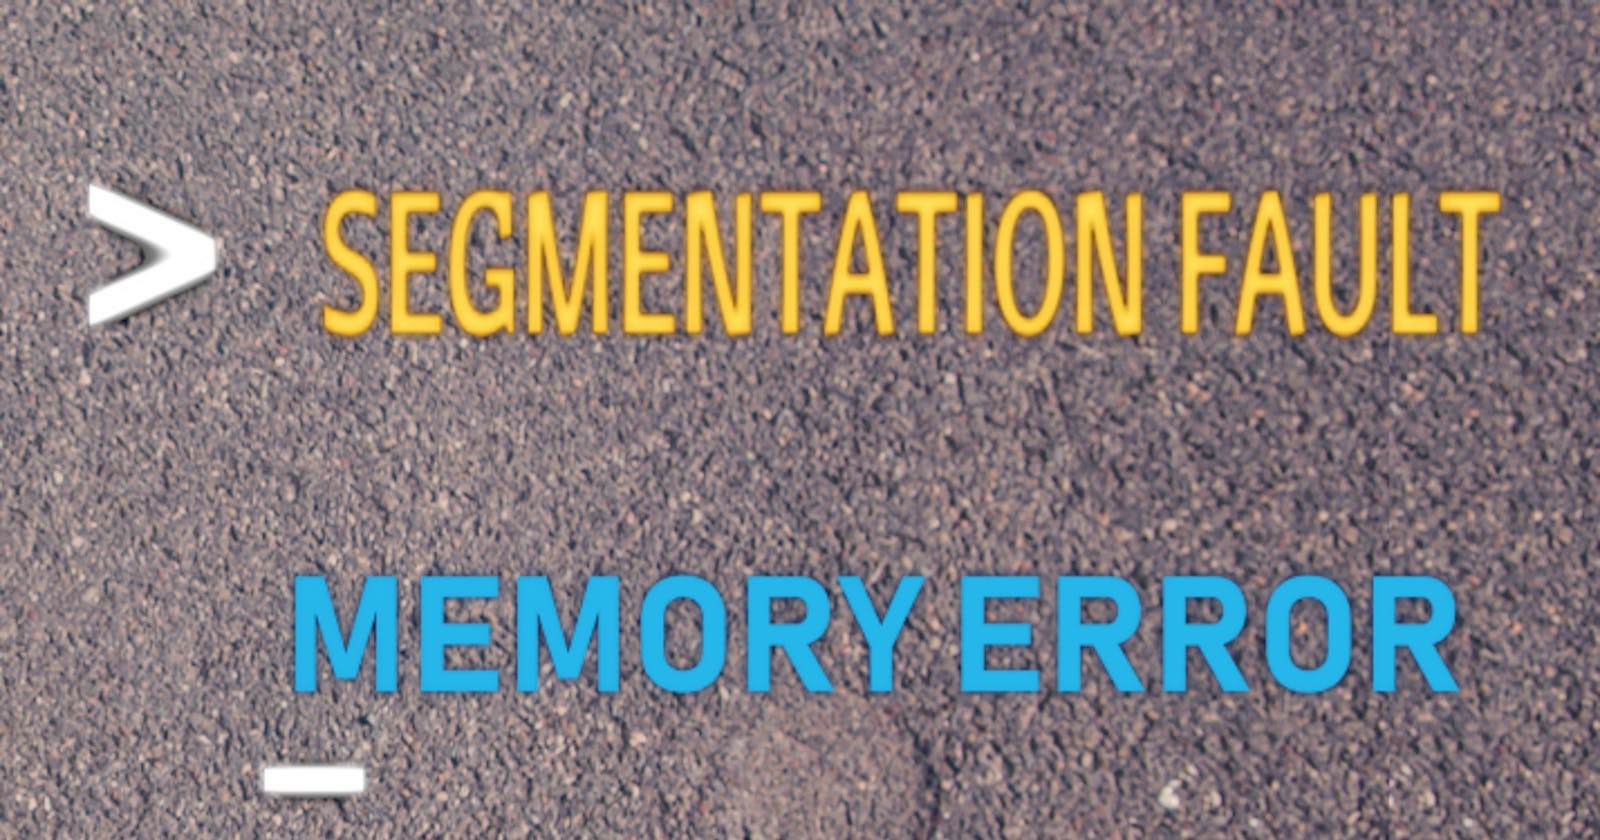 Why segmentation fault occurs in C - programming?